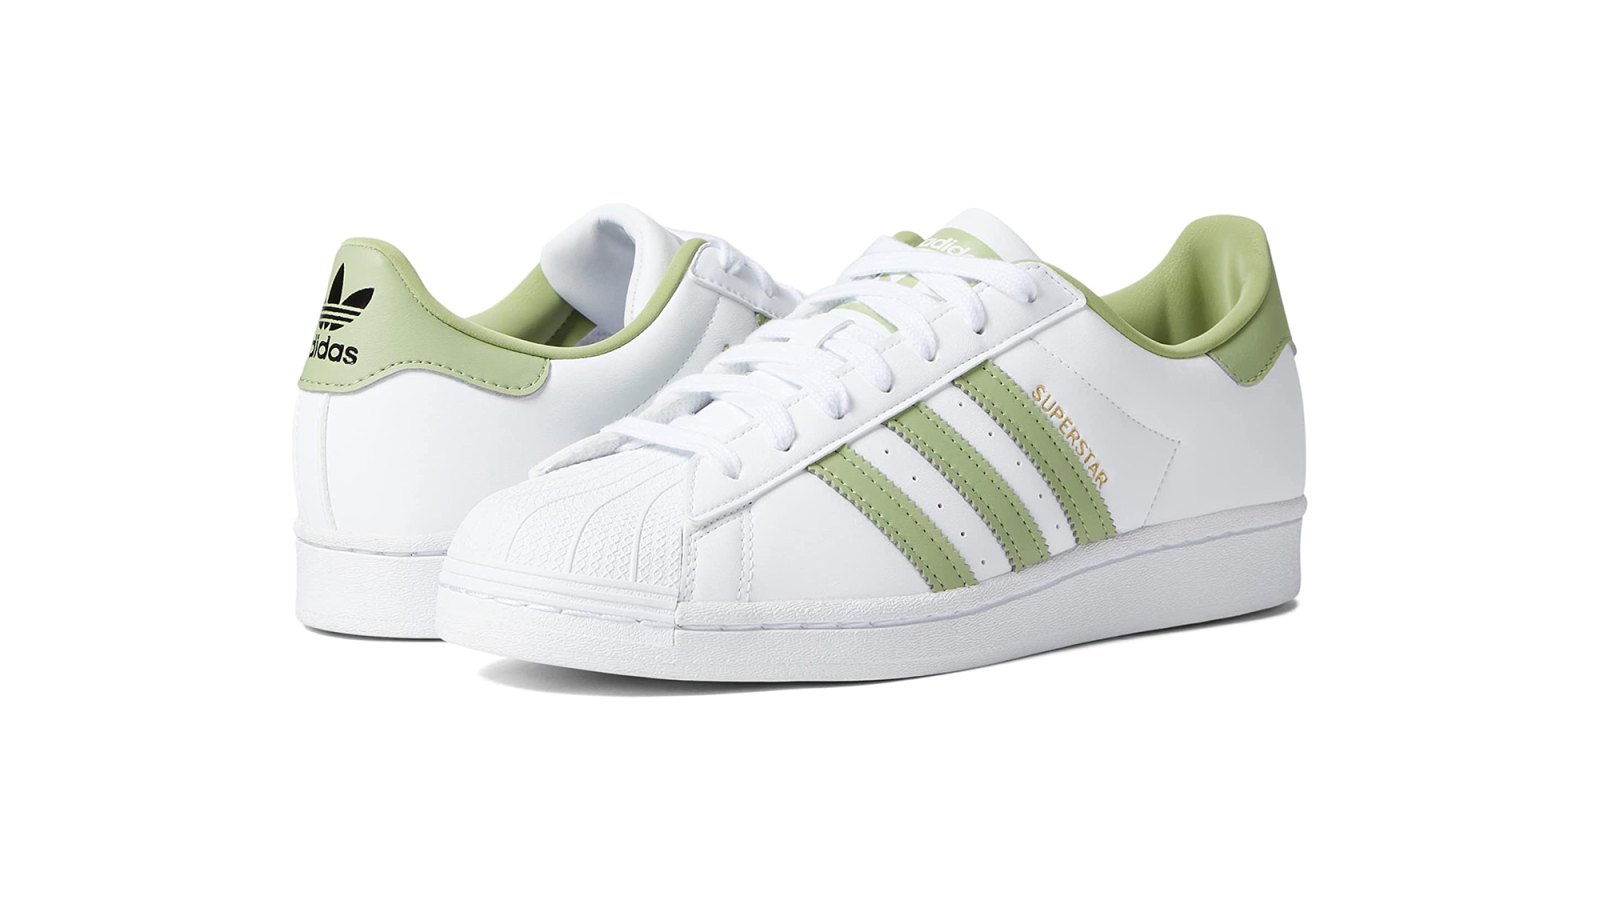 Adidas Classic Sneakers Have a Pop of Color That's Ideal for Spring | Us  Weekly